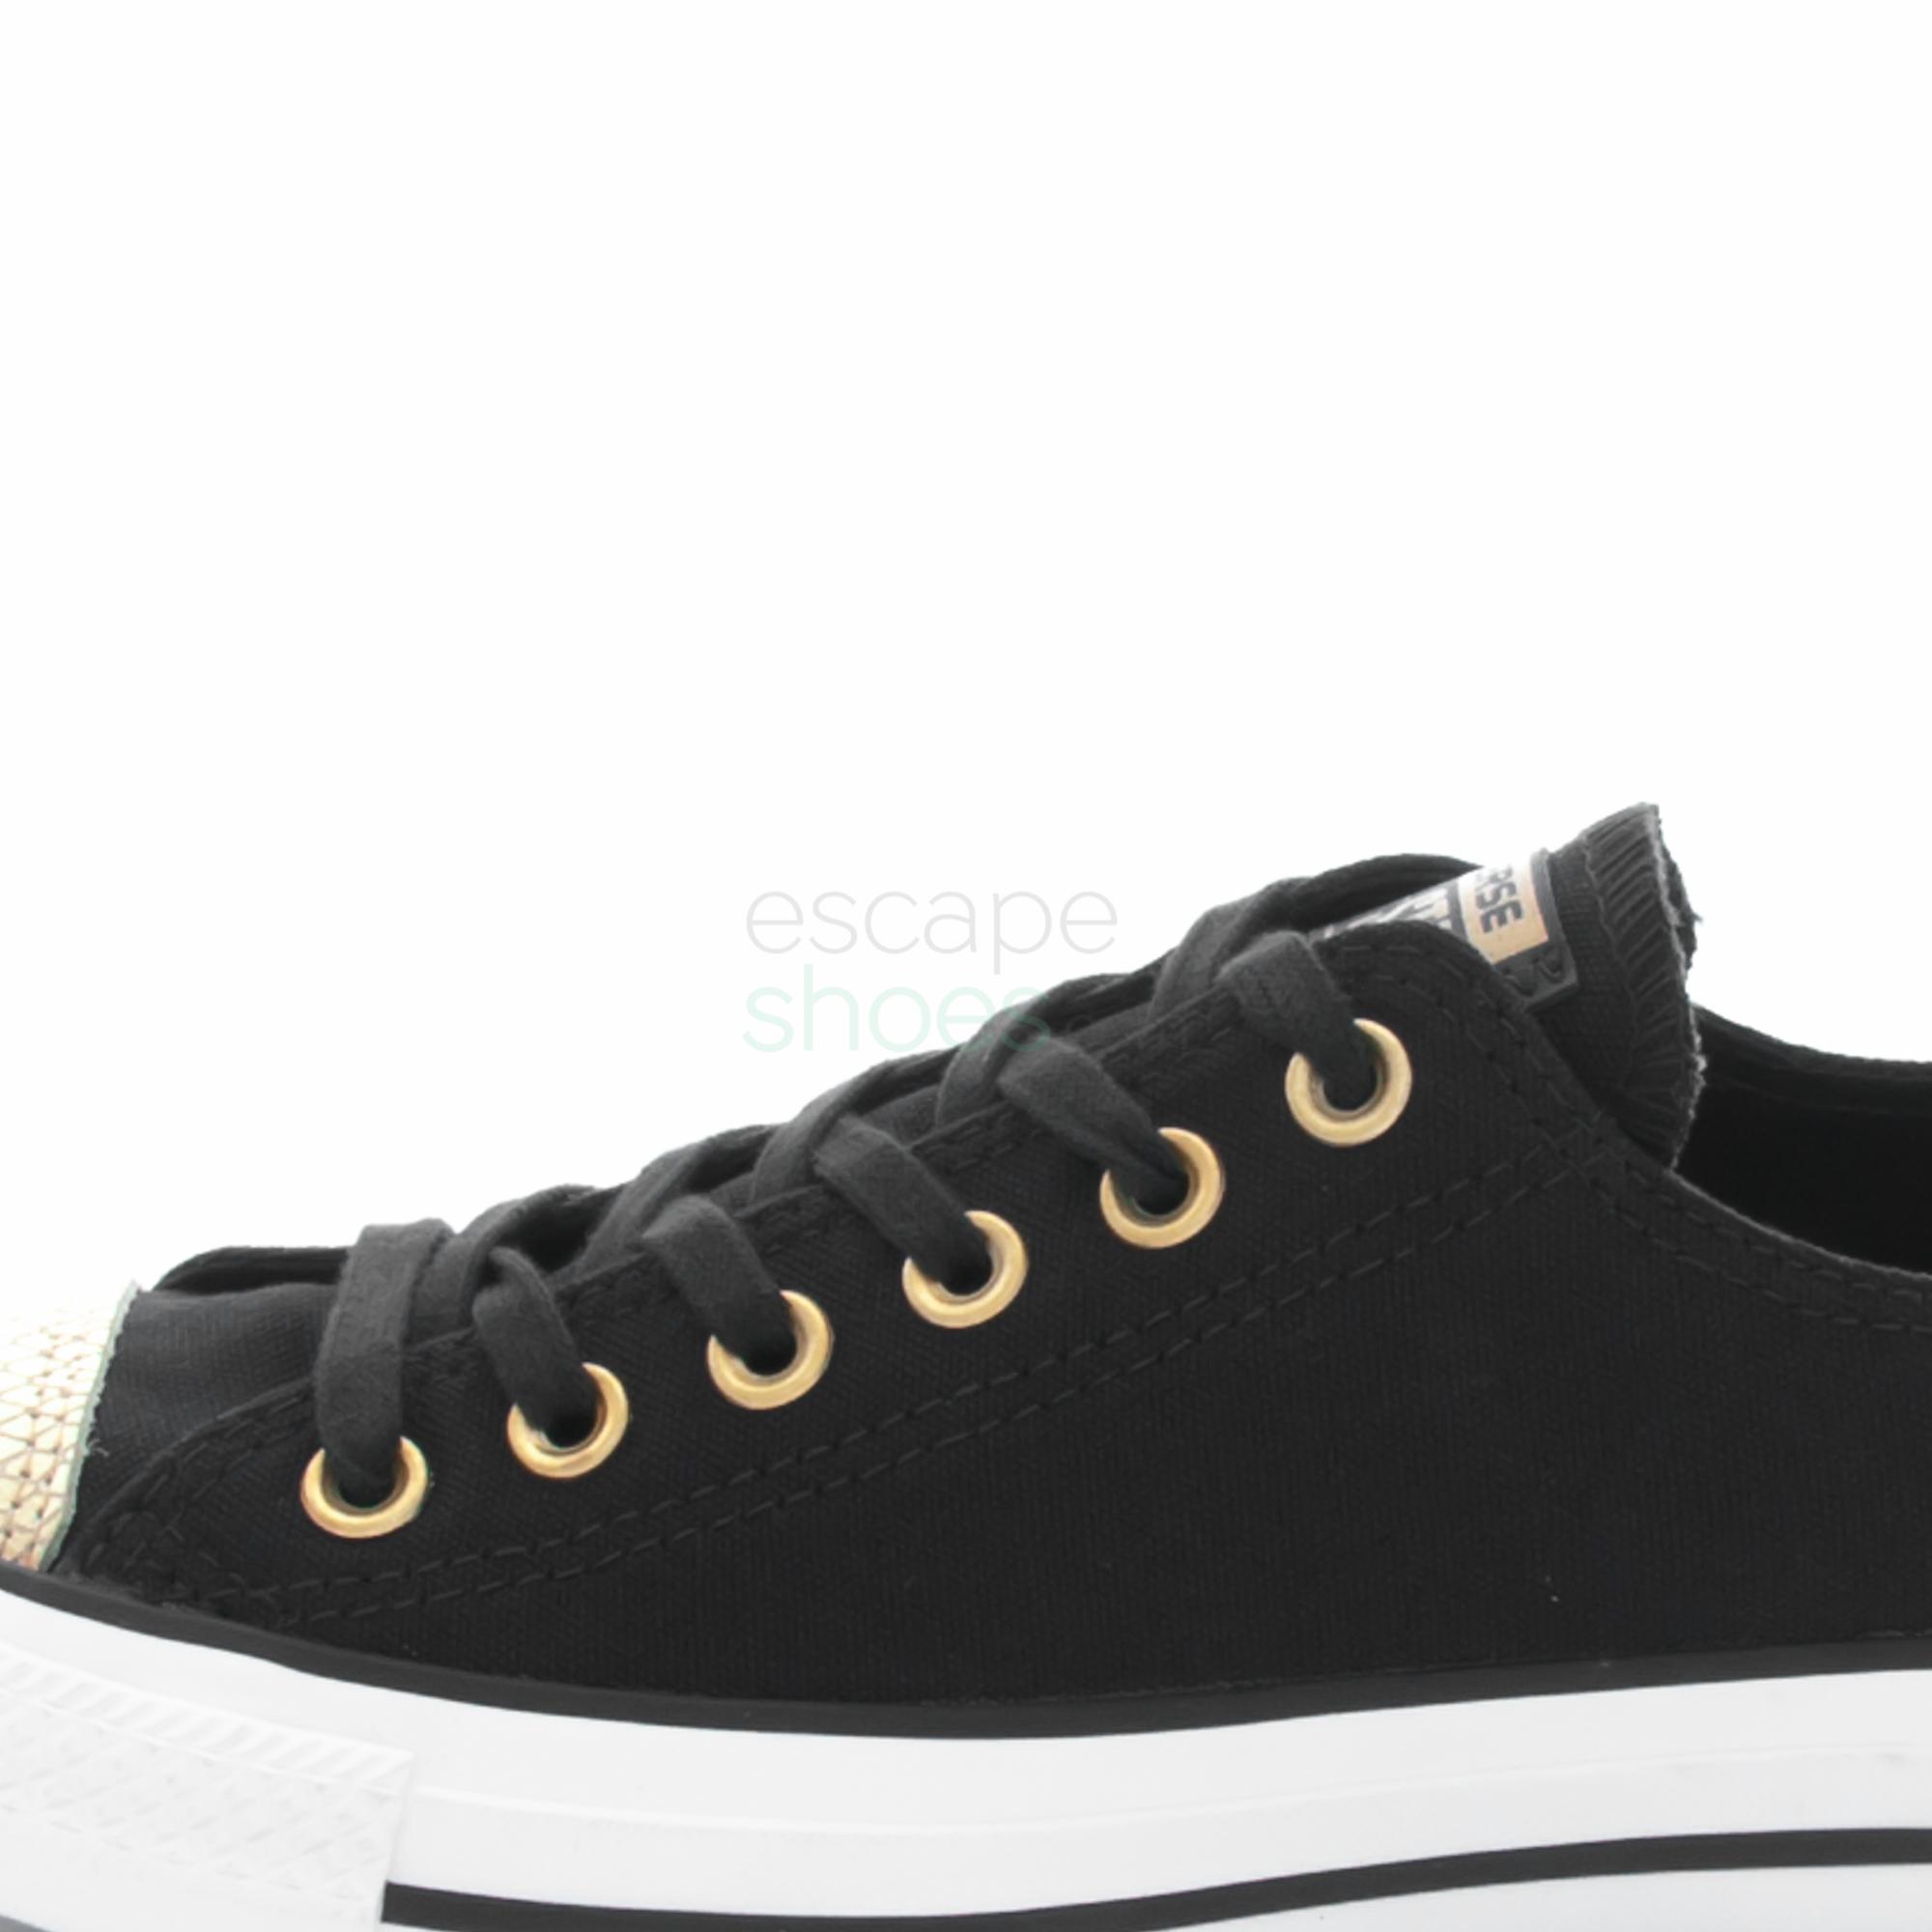 converse all star black and gold